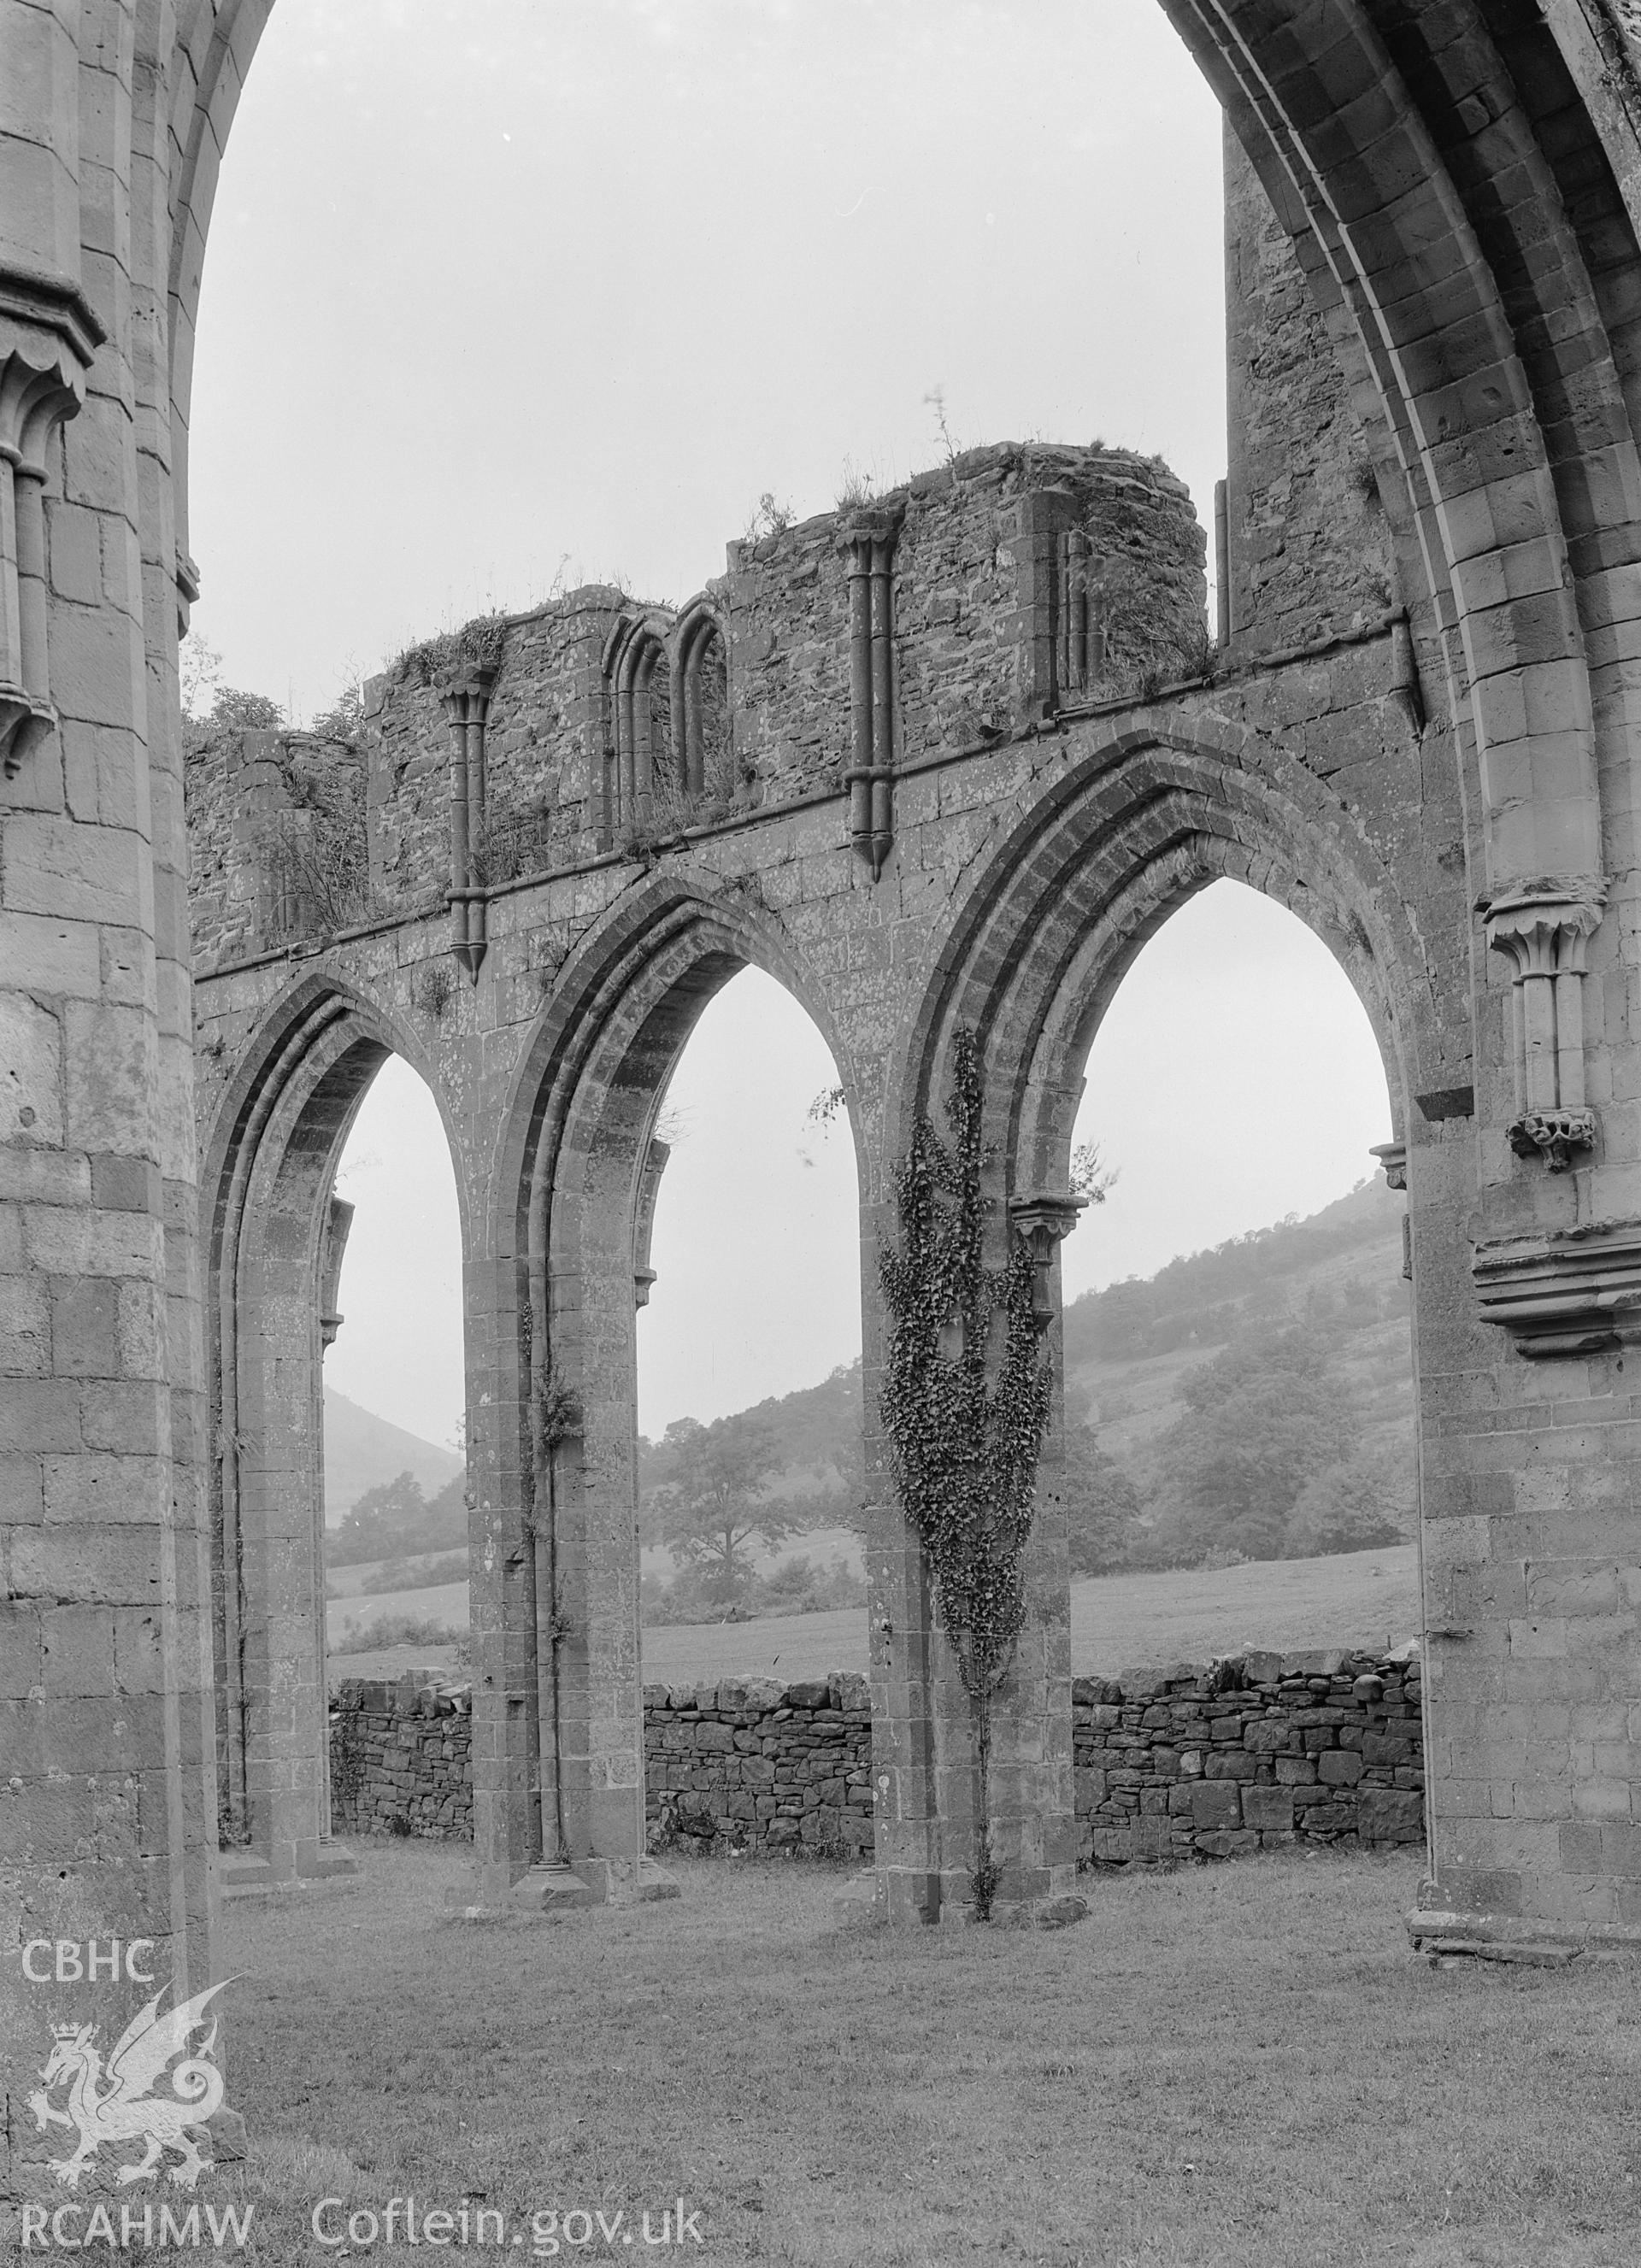 View of the arcade of the nave of Llanthony Abbey.